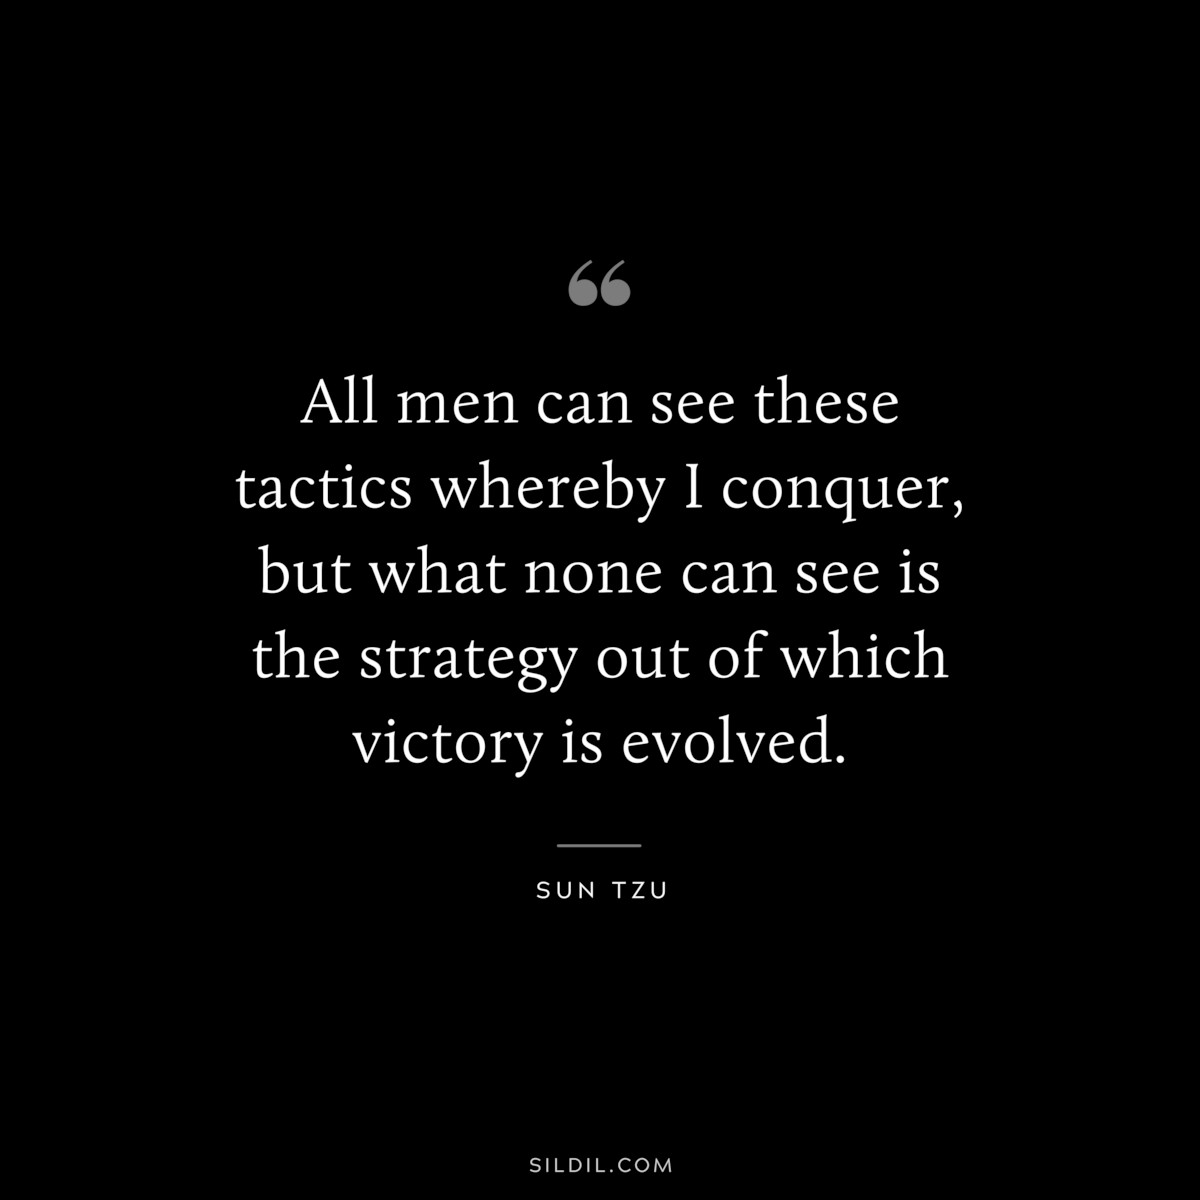 All men can see these tactics whereby I conquer, but what none can see is the strategy out of which victory is evolved.― Sun Tzu